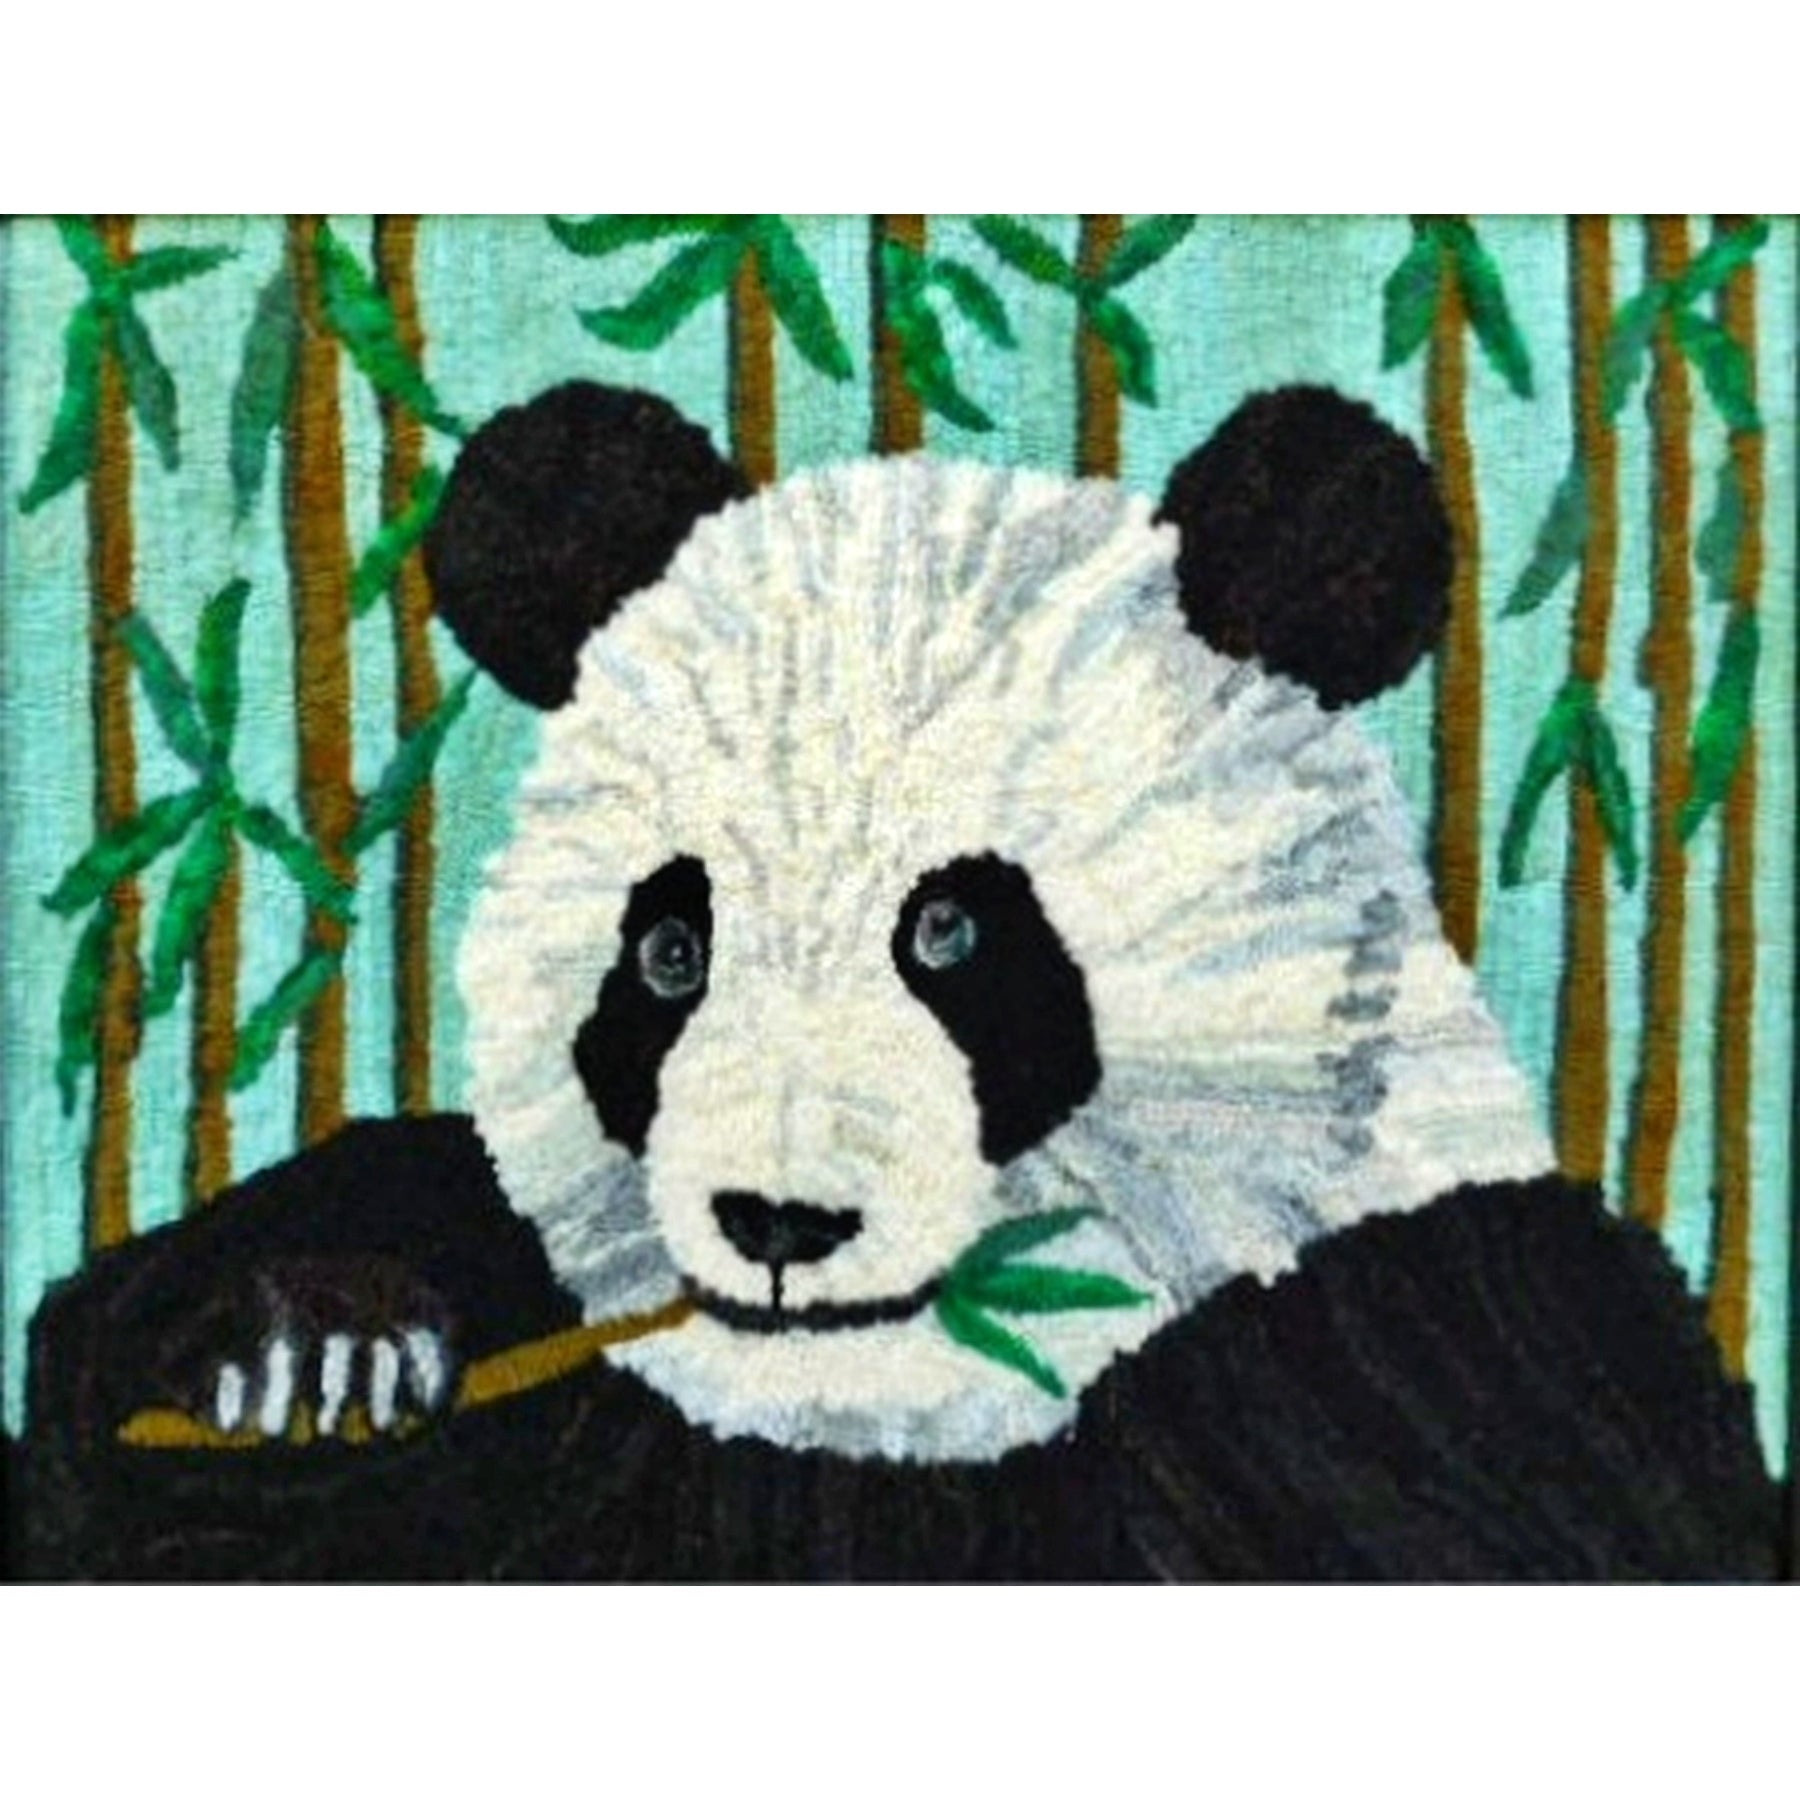 Panda Bear, rug hooked by Mary Ann Young